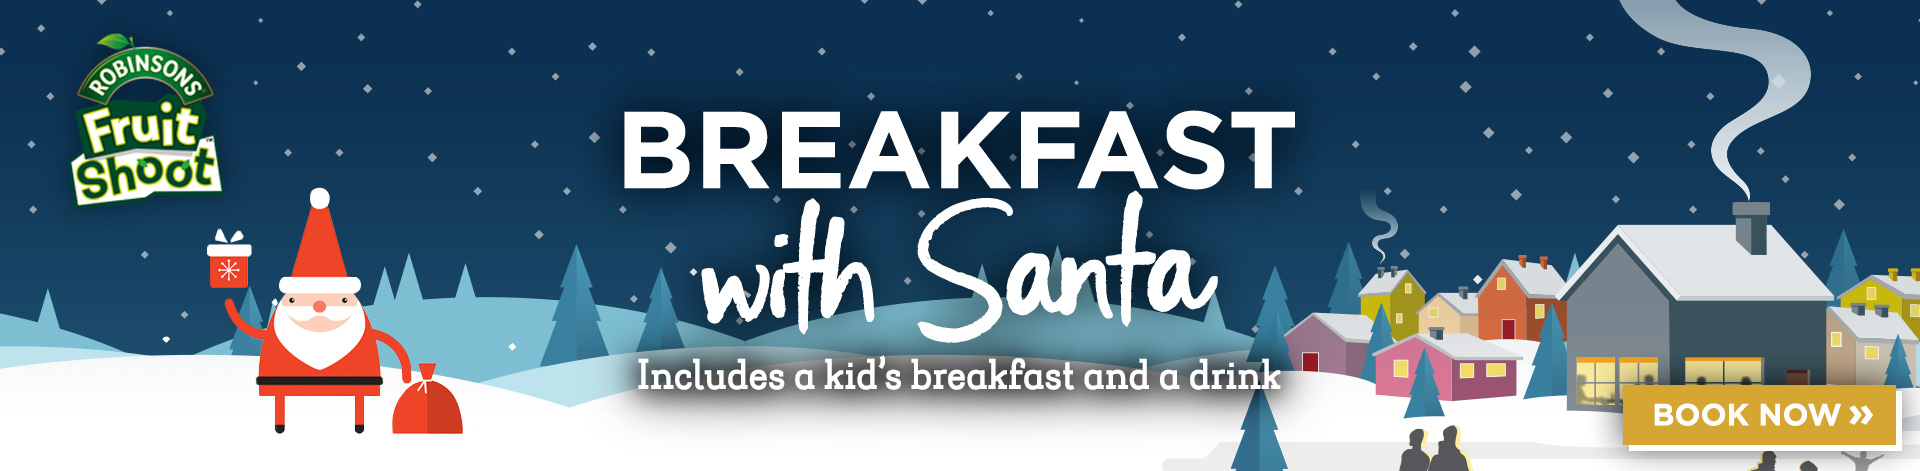 Breakfast with Santa menu at The Farmers Arms